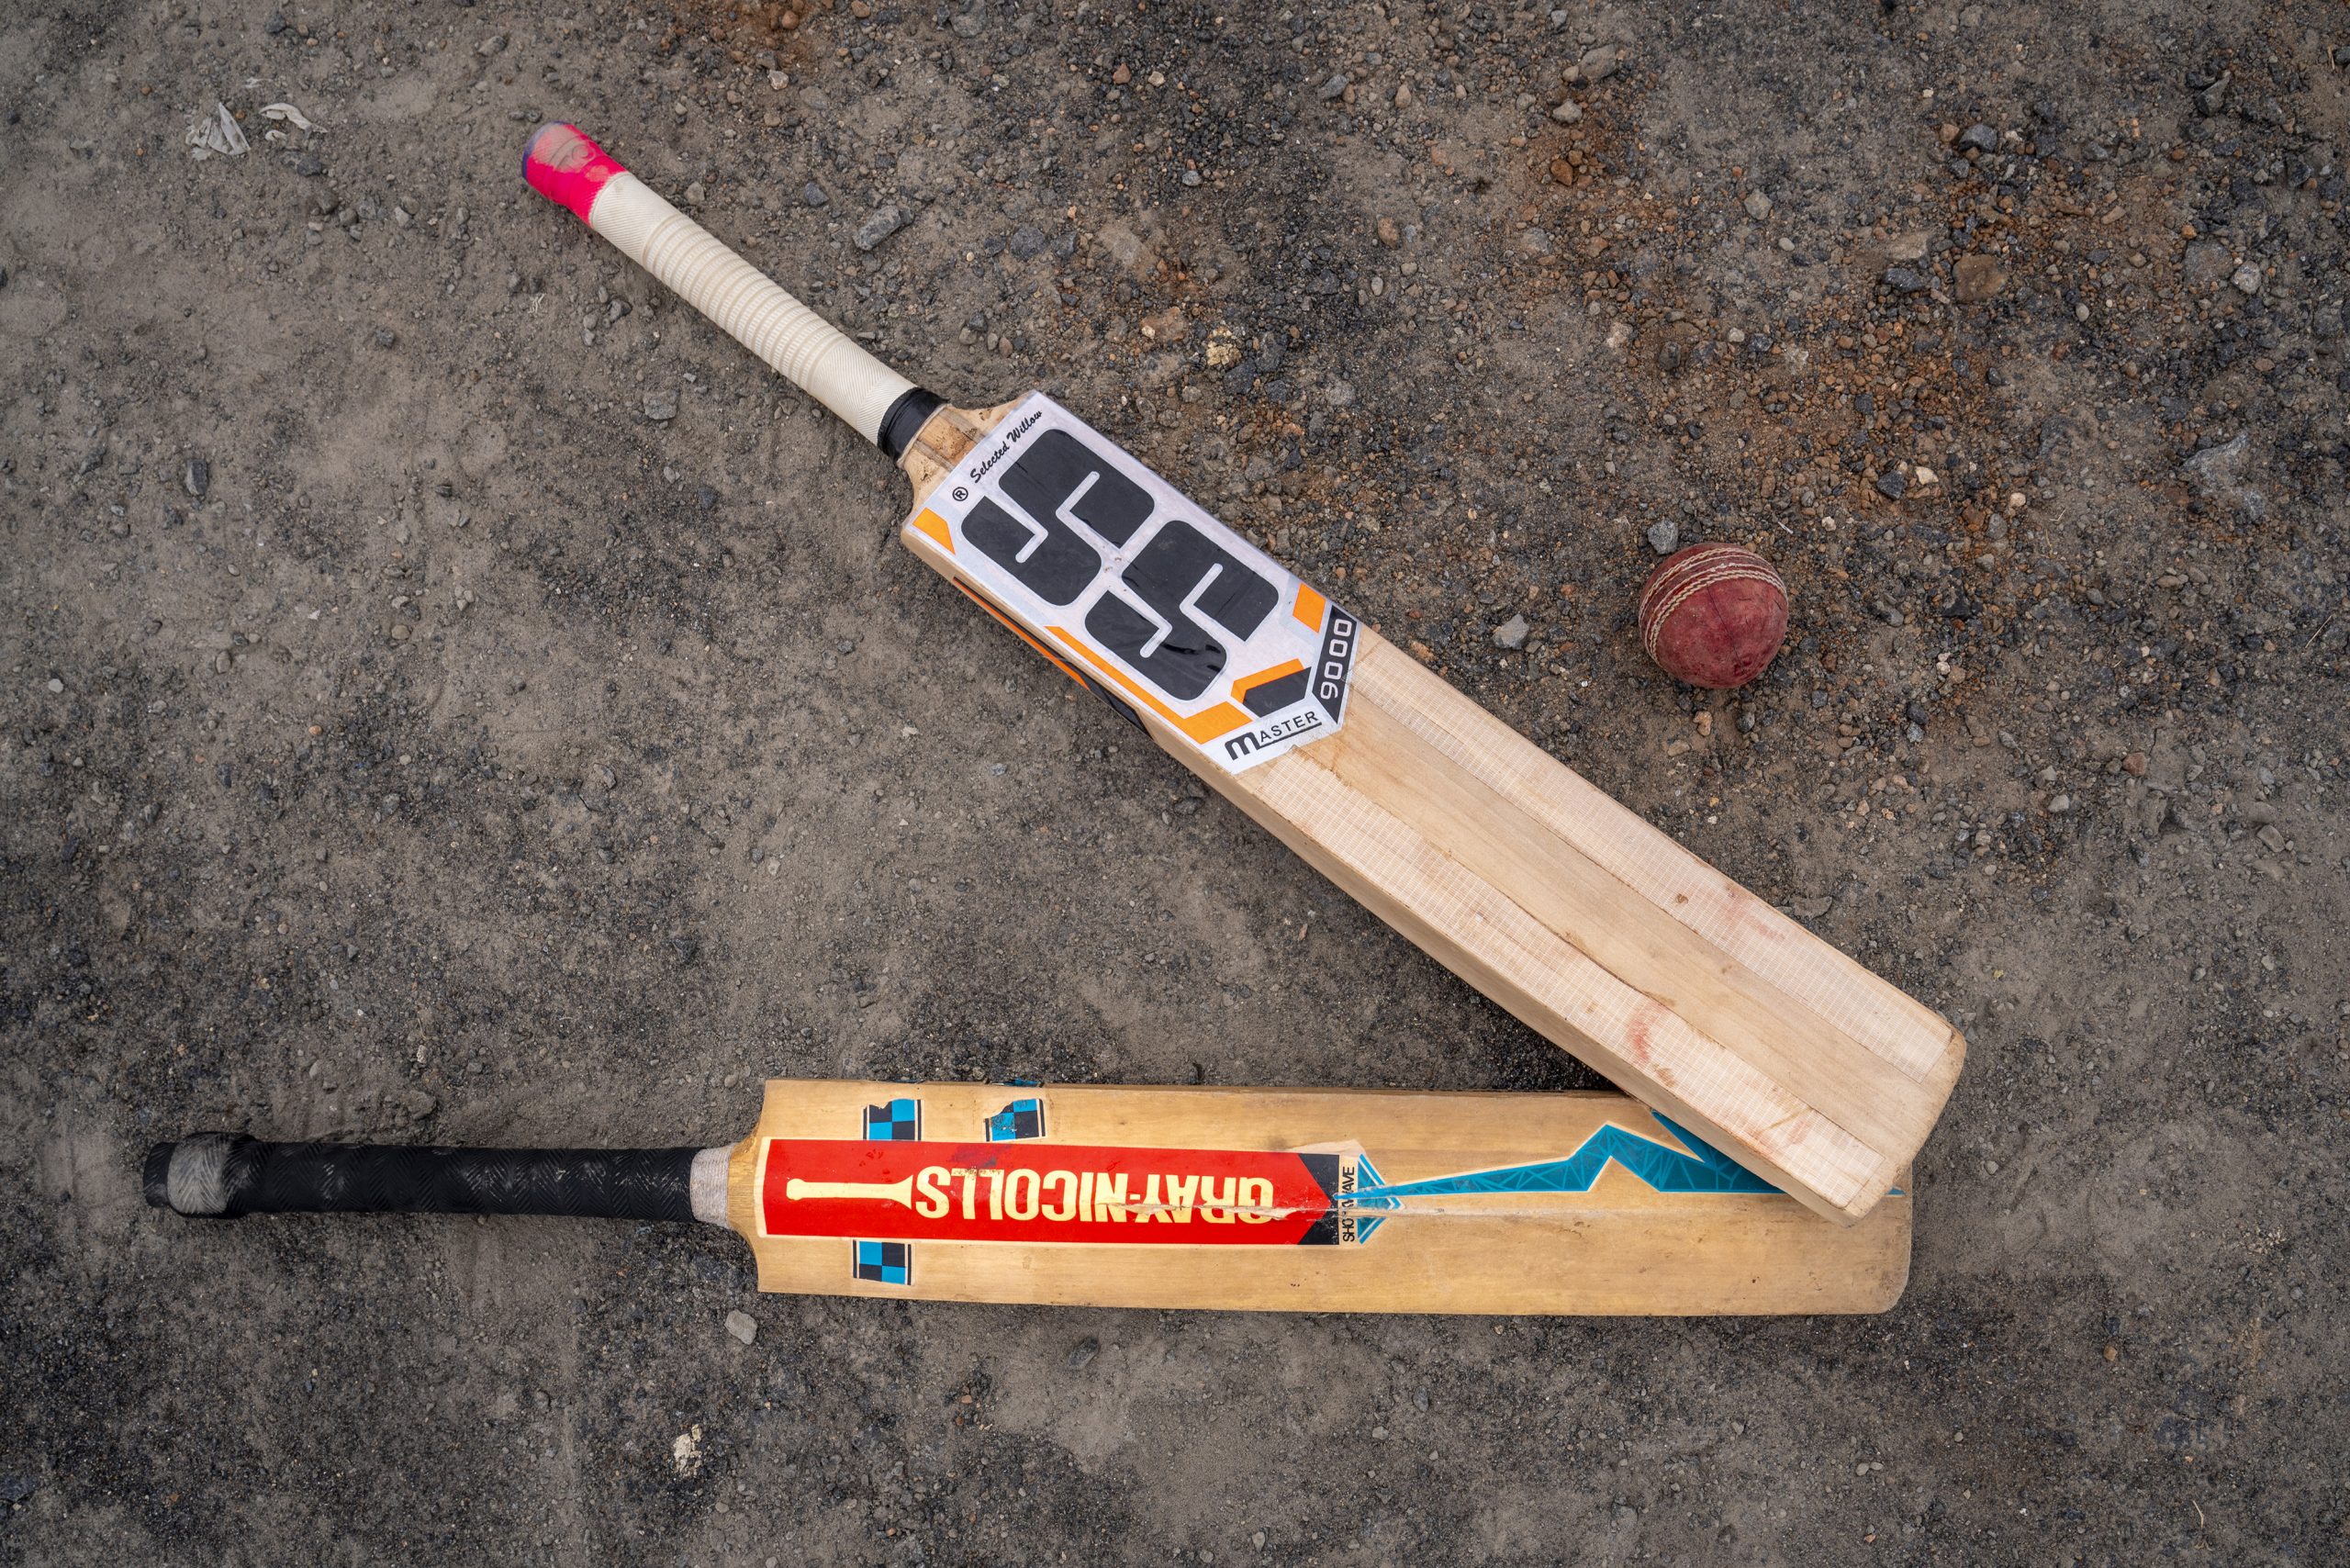 which is the expensive Cricket bat?